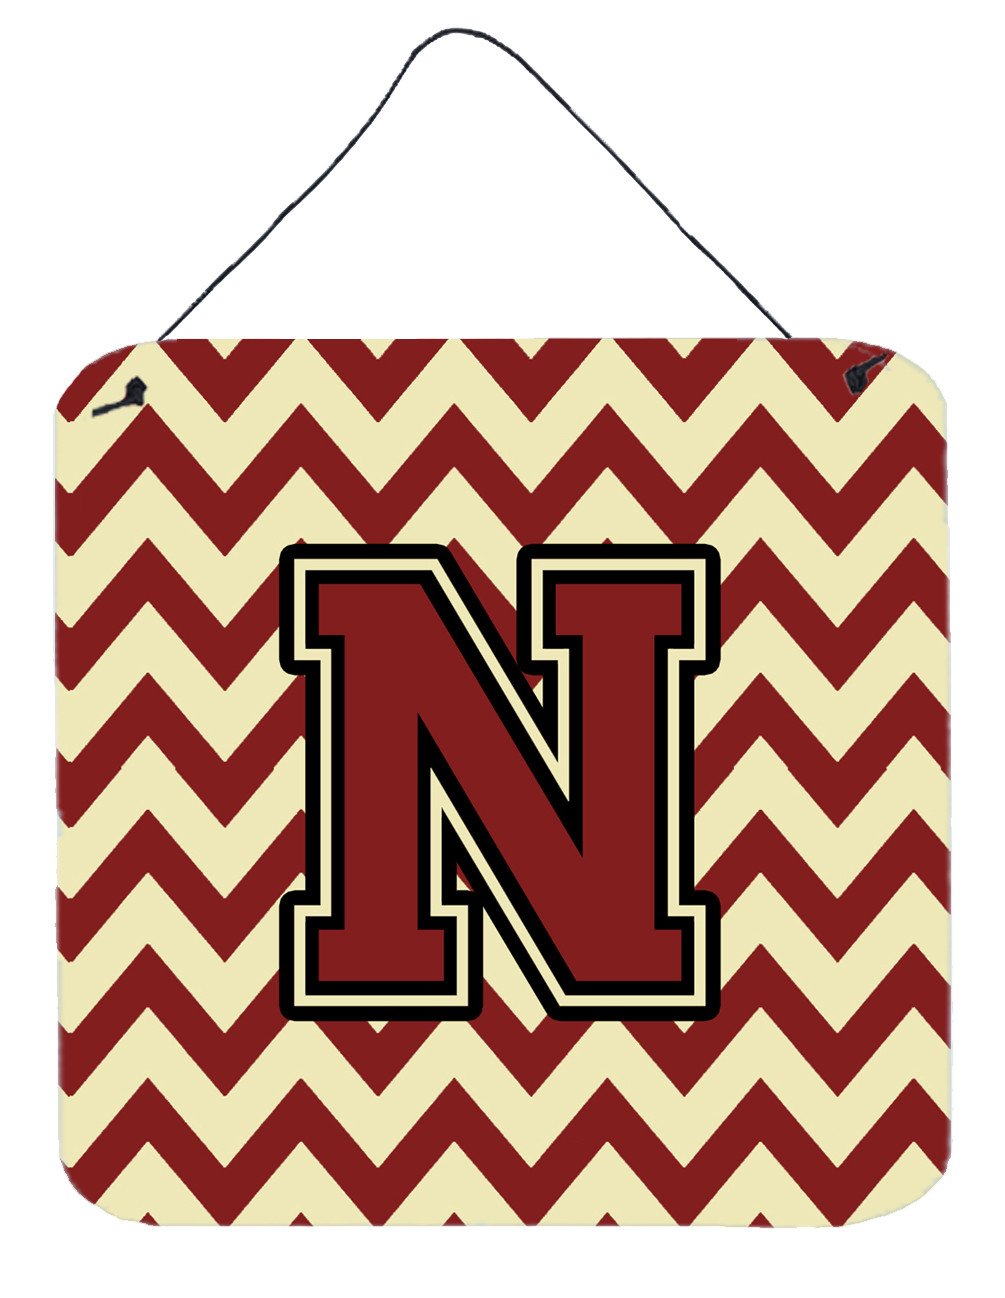 Letter N Chevron Maroon and Gold Wall or Door Hanging Prints CJ1061-NDS66 by Caroline's Treasures